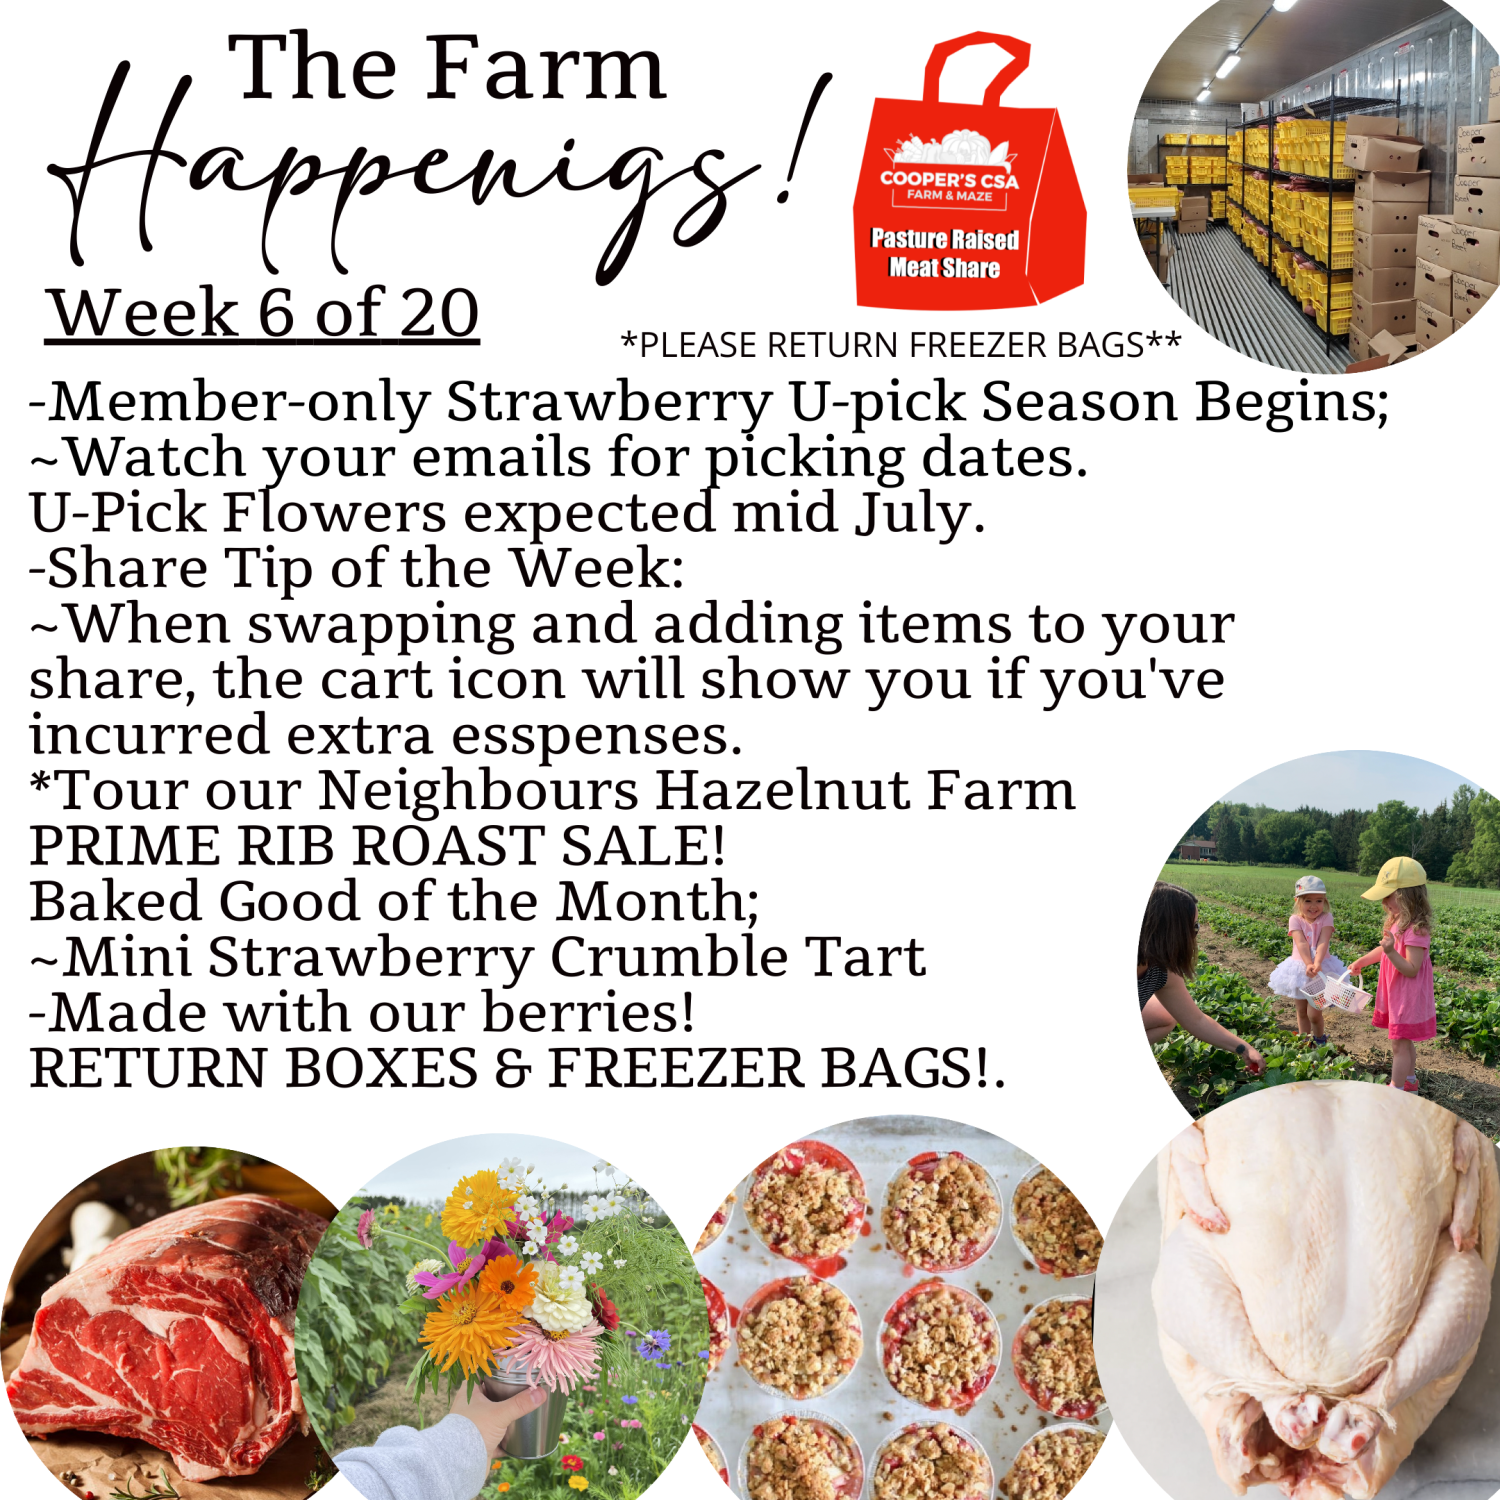 Previous Happening: "Pasture Meat Shares"-Coopers CSA Farm Farm Happenings Week 6 of 20